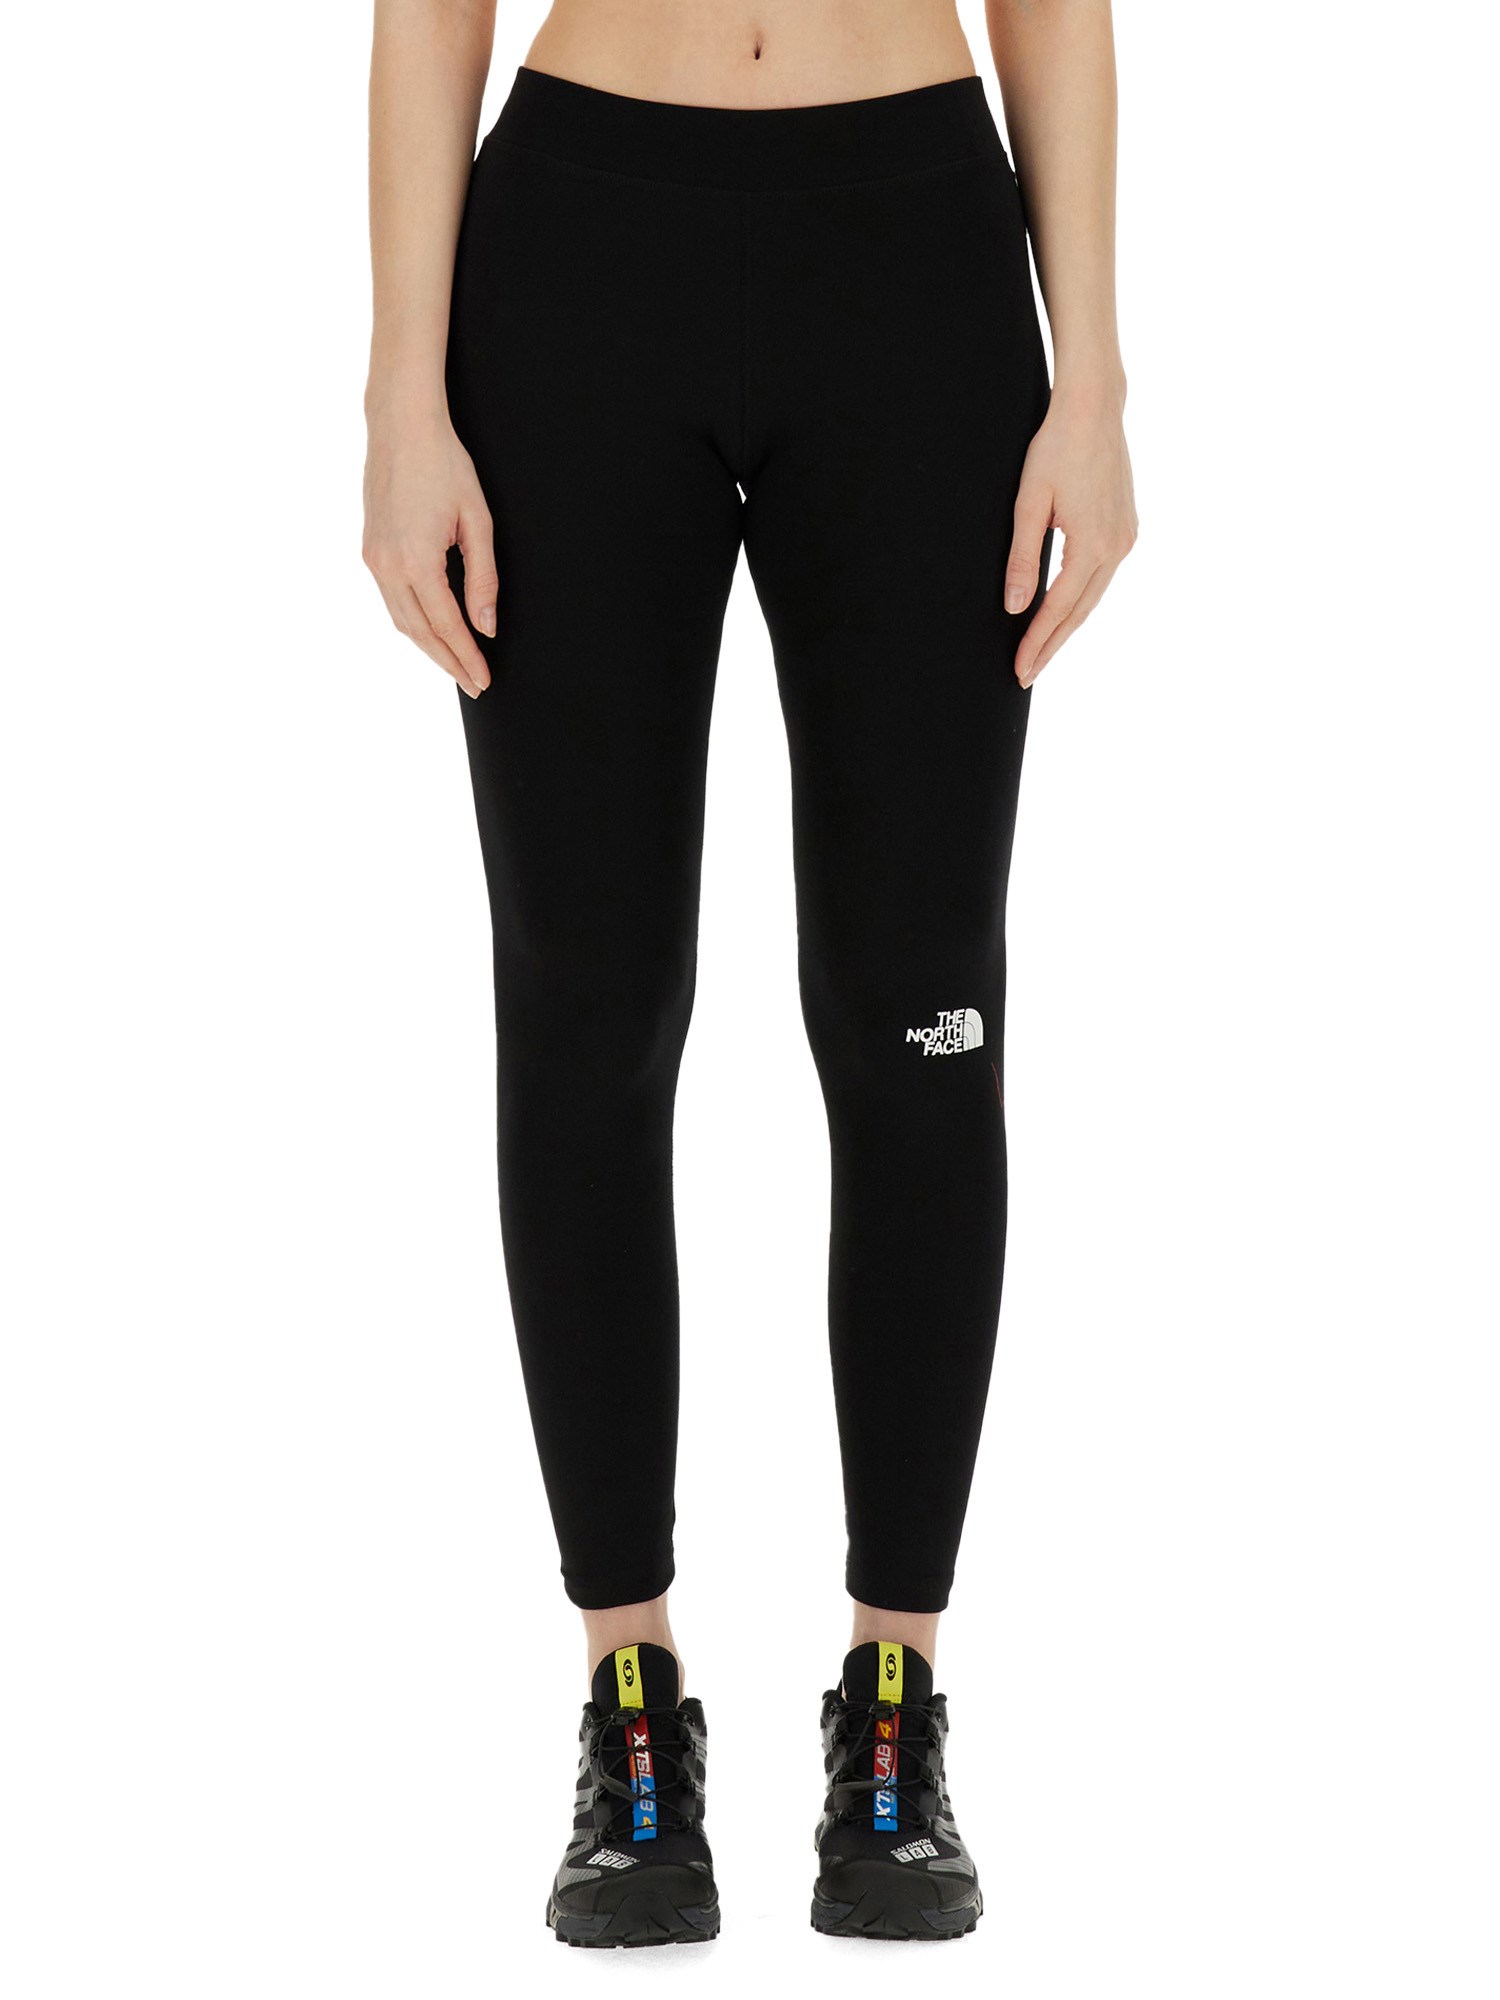 THE NORTH FACE LEGGINGS WITH LOGO